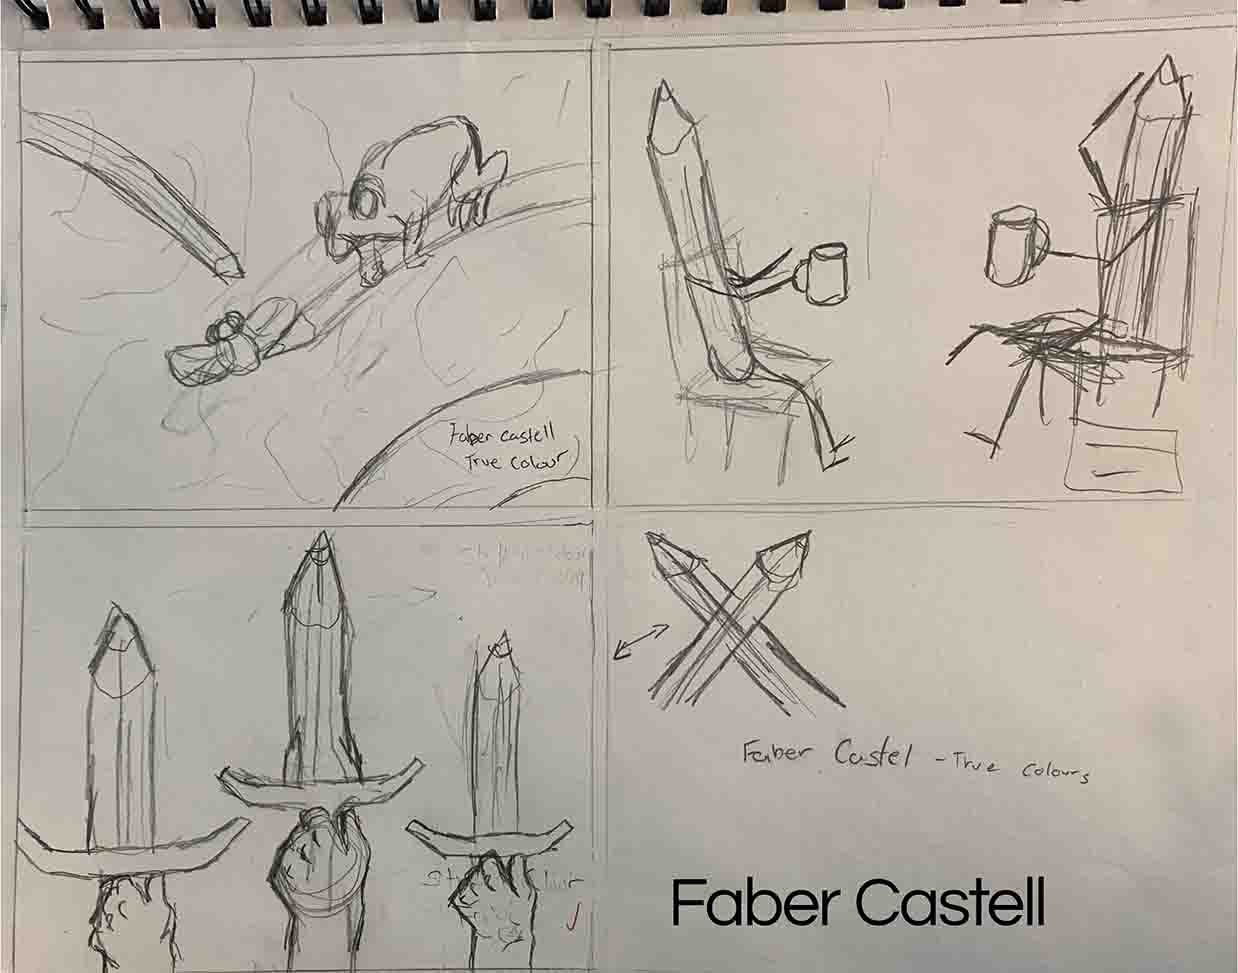 thumbnails for alternative brands 2-page Faber Castell ad